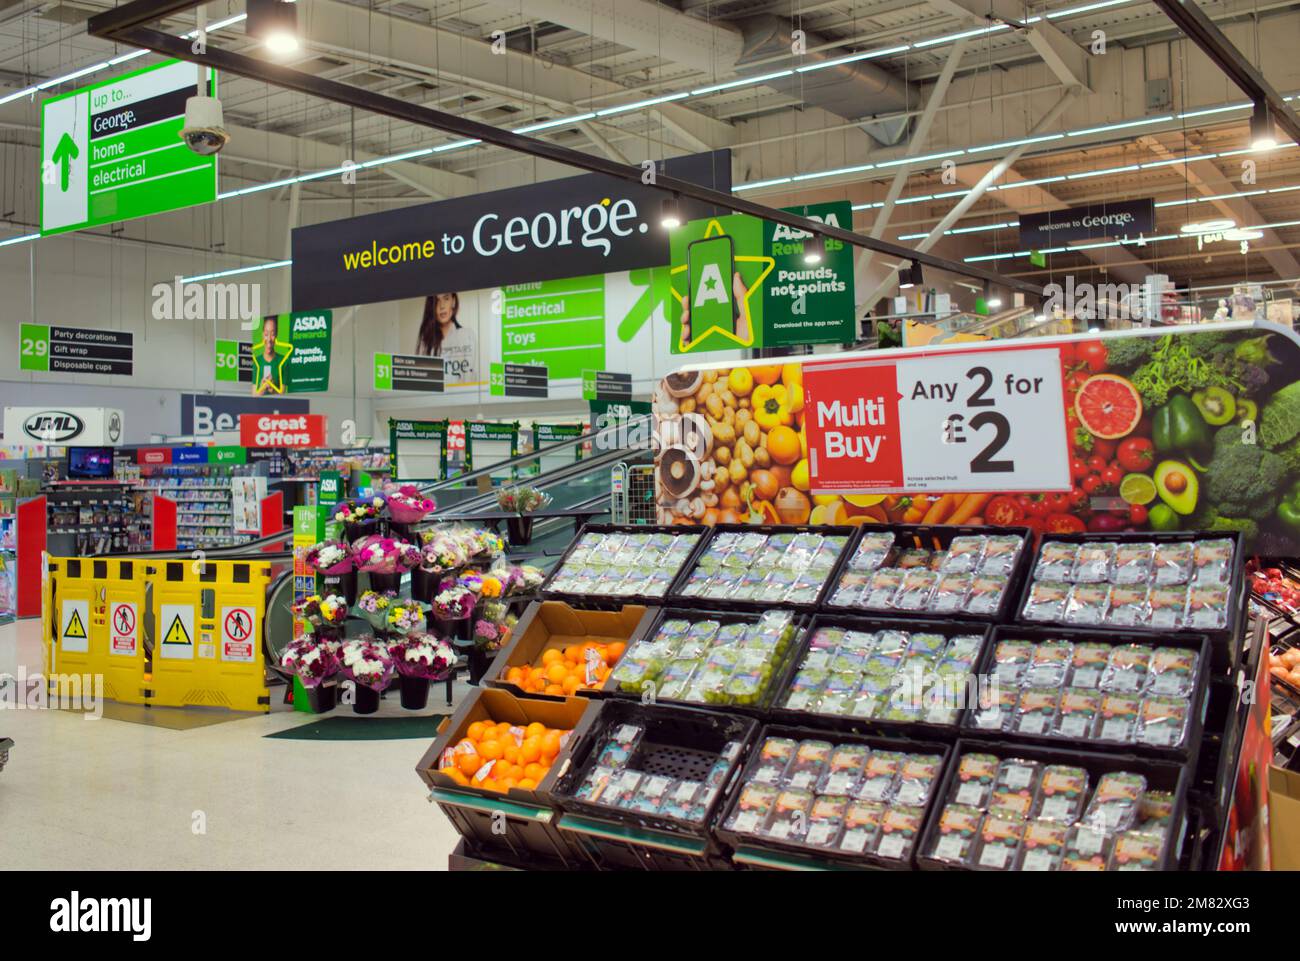 Asda supermarket interior George sign with shelves of produce and groceries Stock Photo